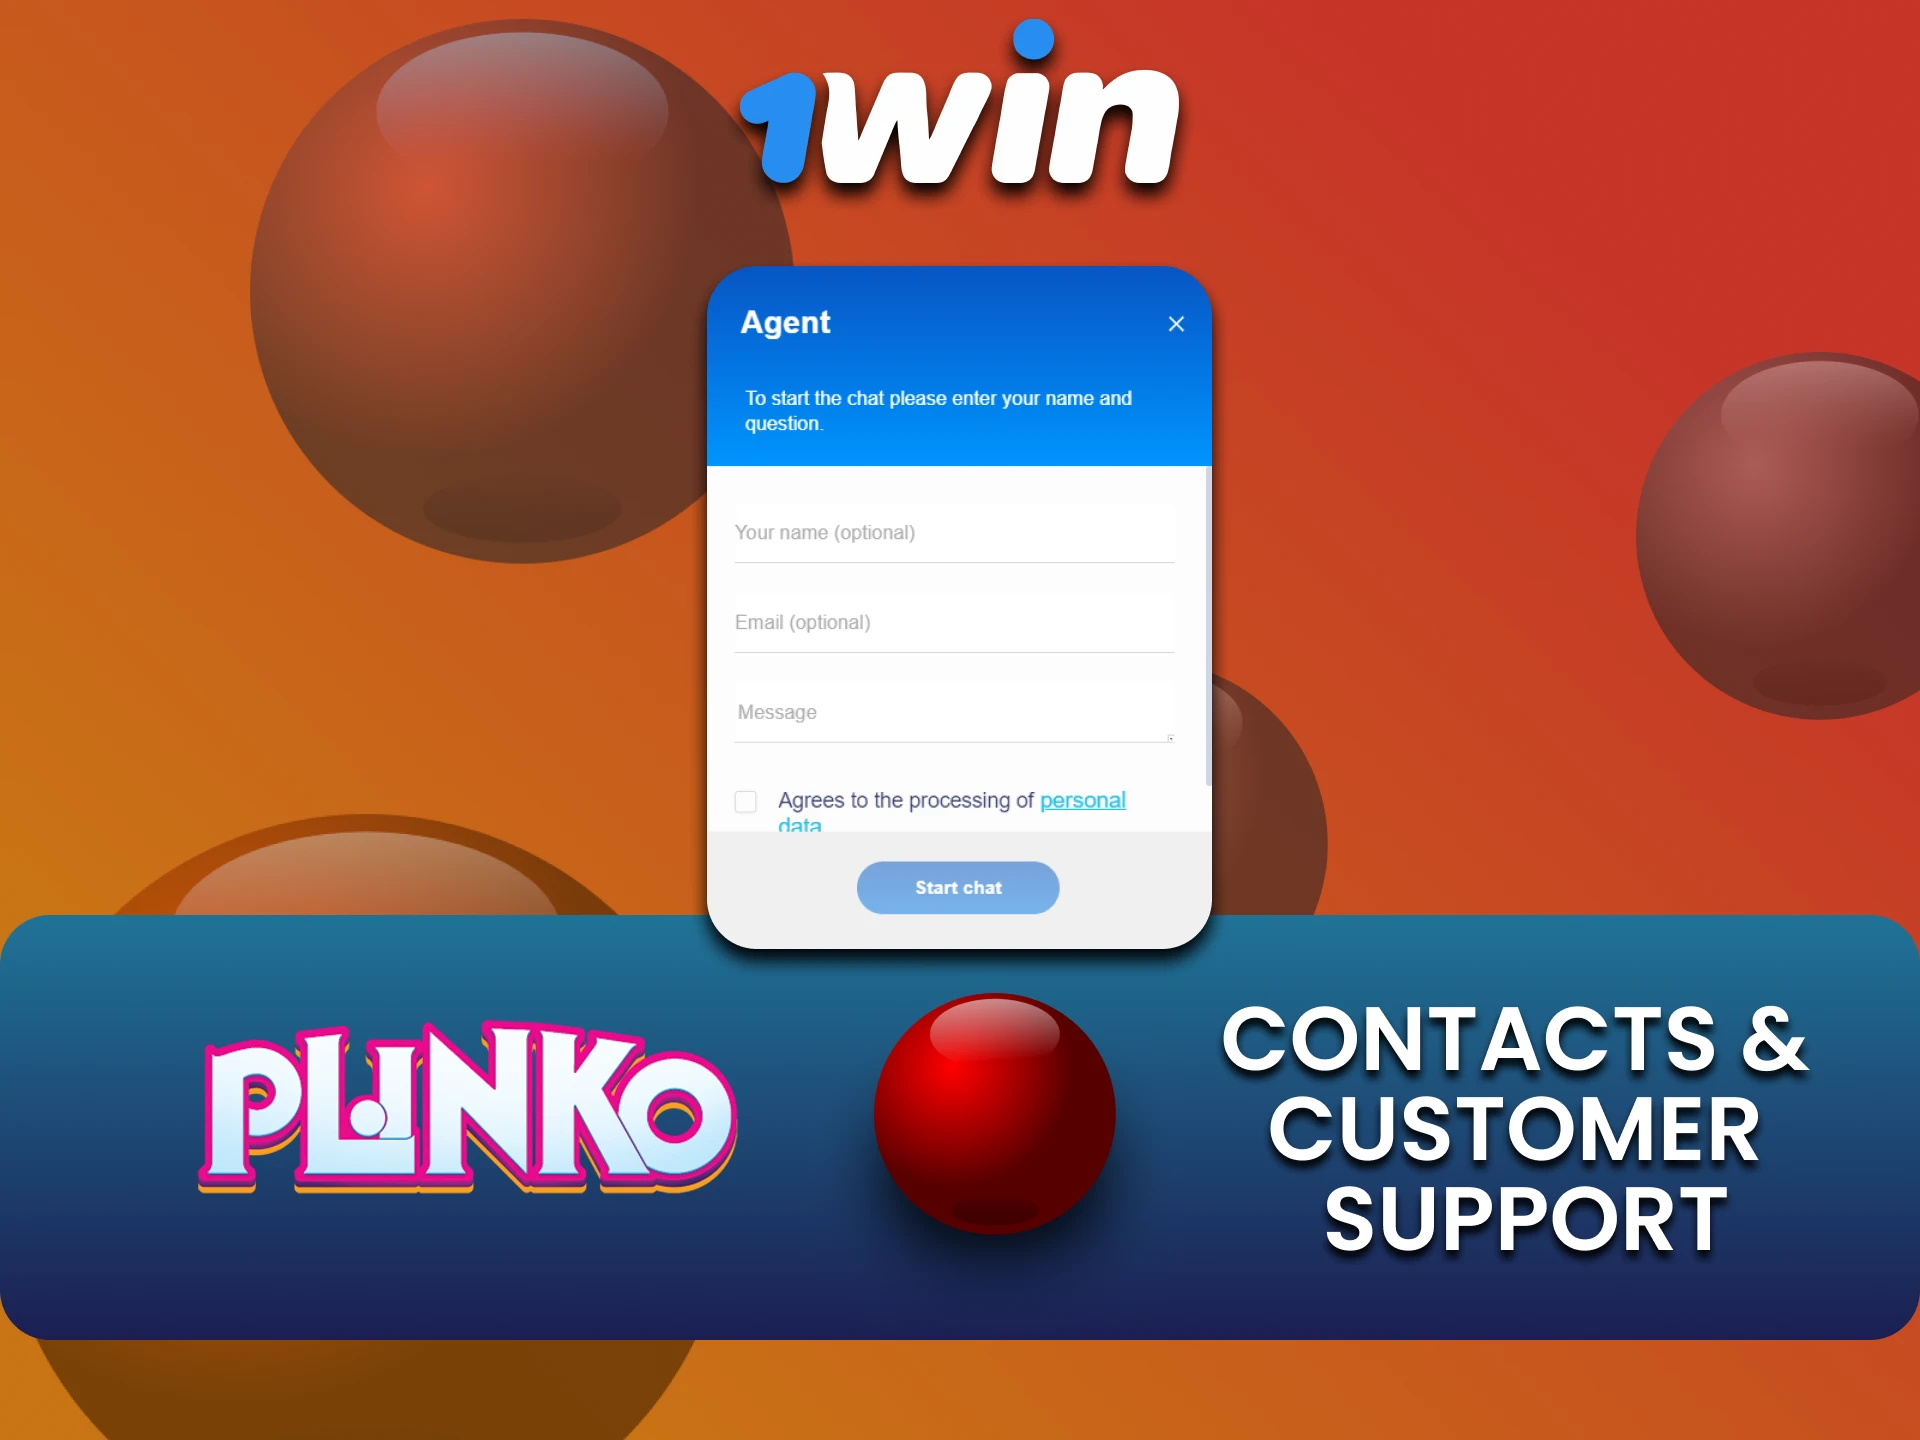 Find out how to contact the 1win team regarding the Plinko game.